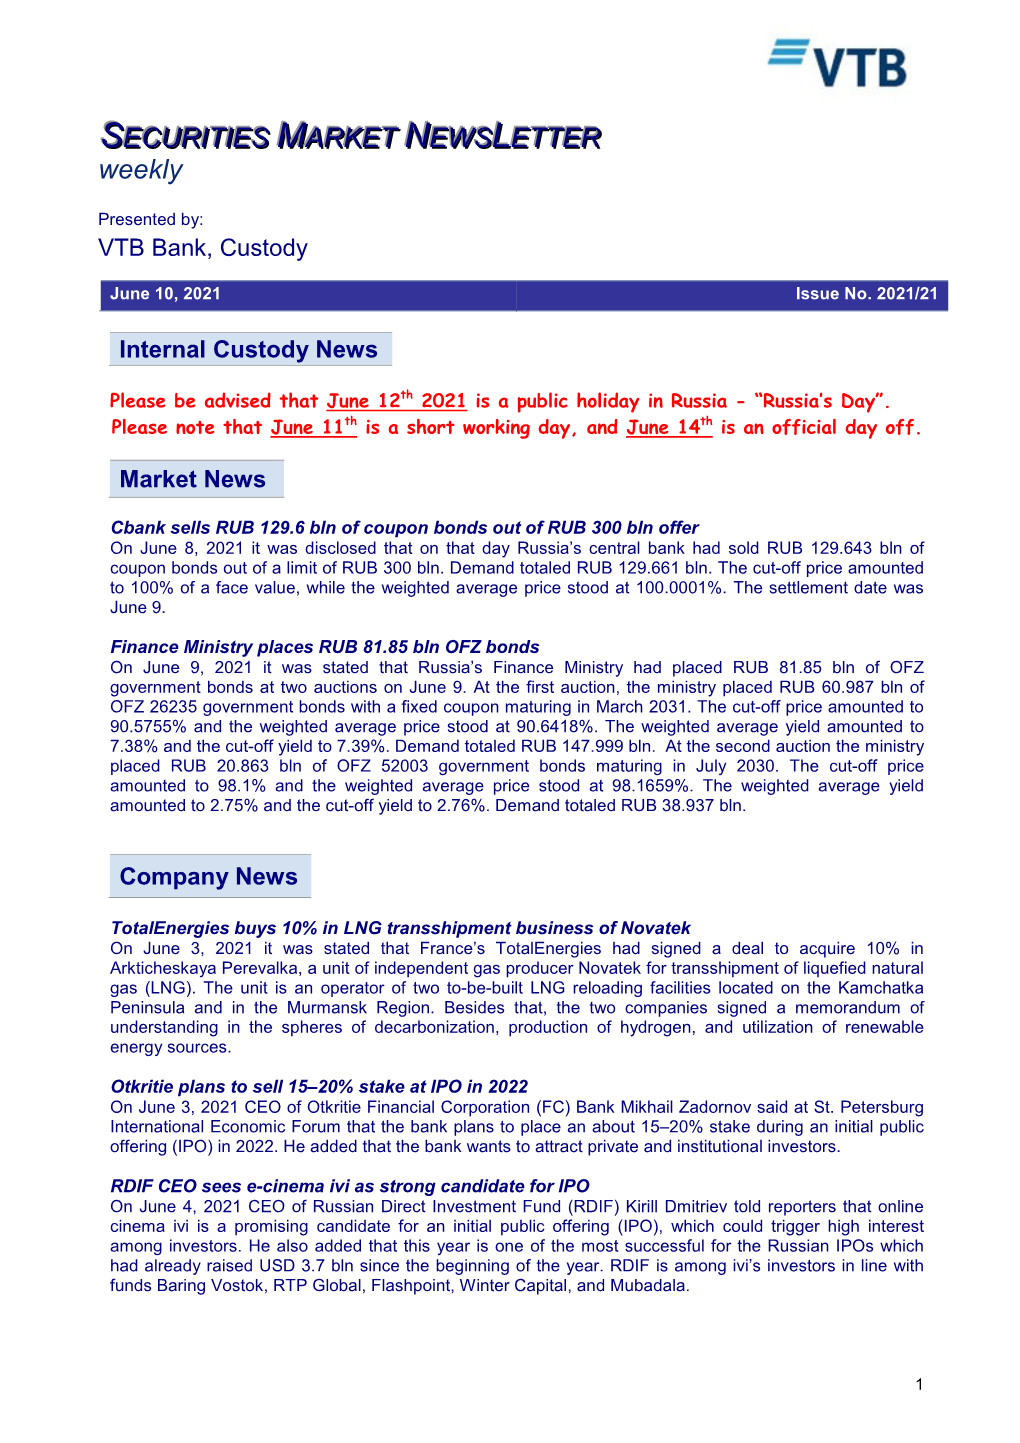 SECURITIES MARKET NEWS LETTER Weekly